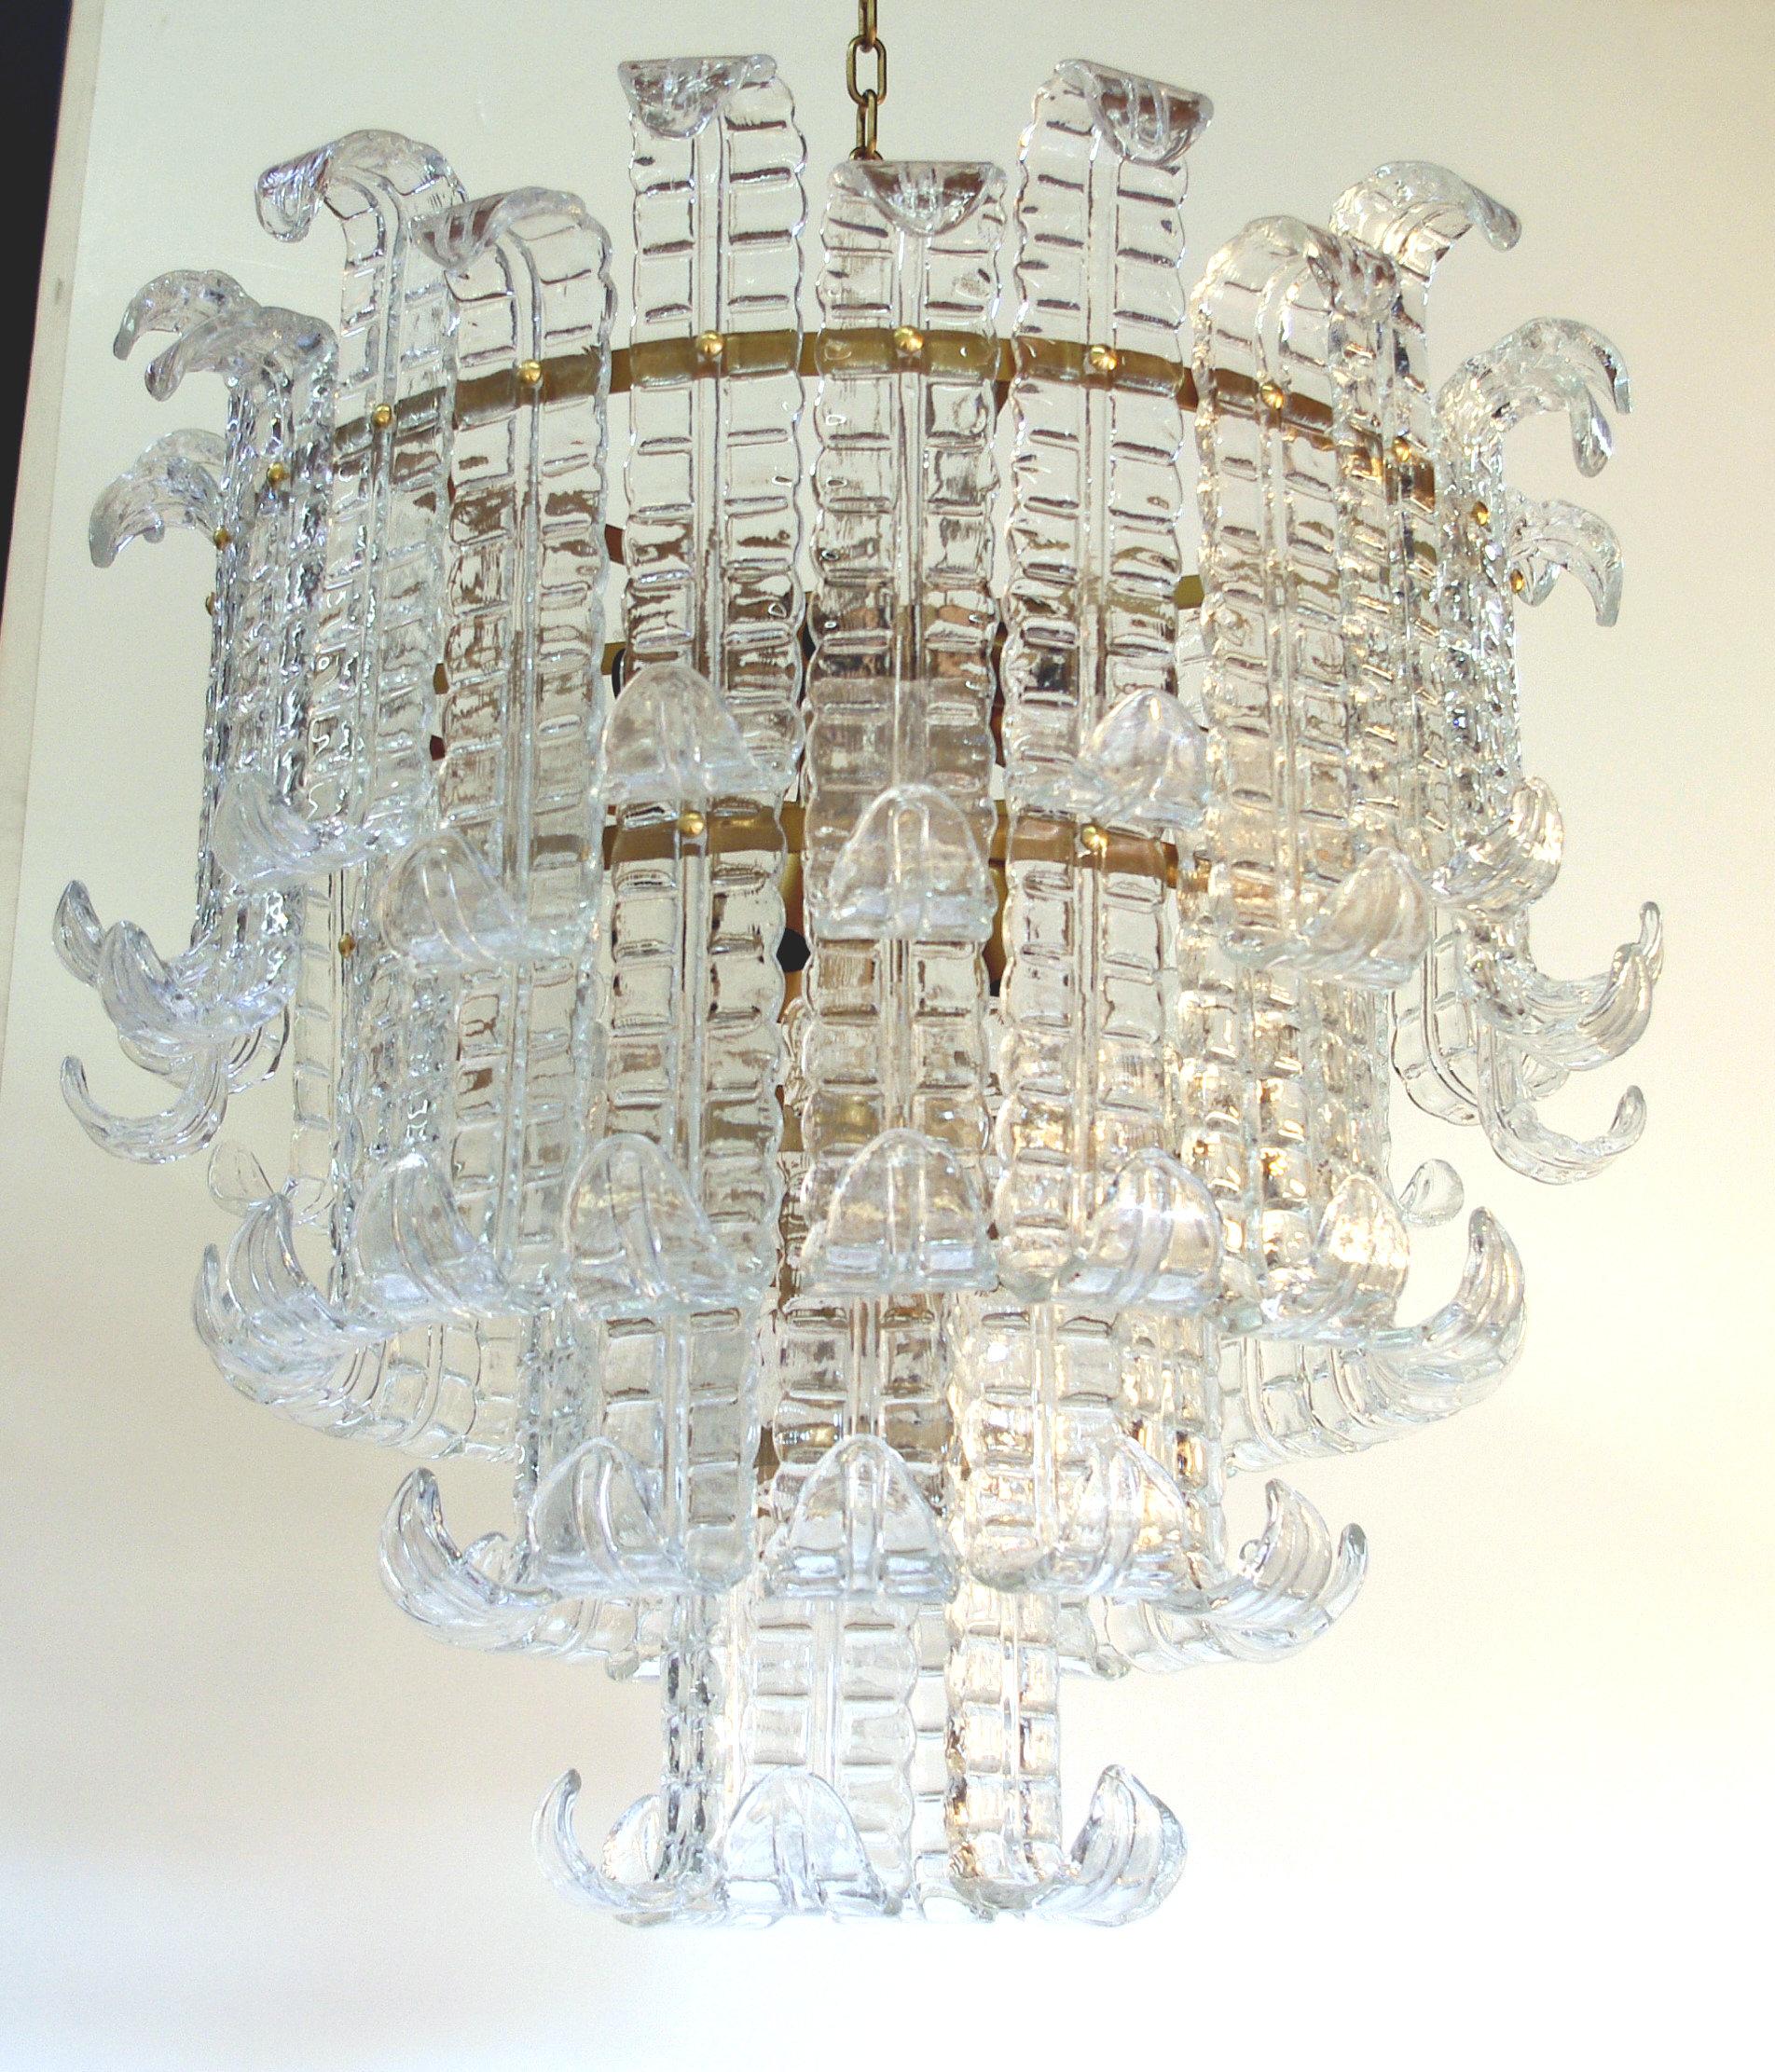 Italian chandelier shown with four tiers of clear hand blown Murano Felci fern glasses mounted on bronzed finish metal frame, by Fabio Ltd / Made in Italy
10 lights / E26 or E27 type / max 60W each
Measures: Diameter: 31.5 inches / Height: 27.5